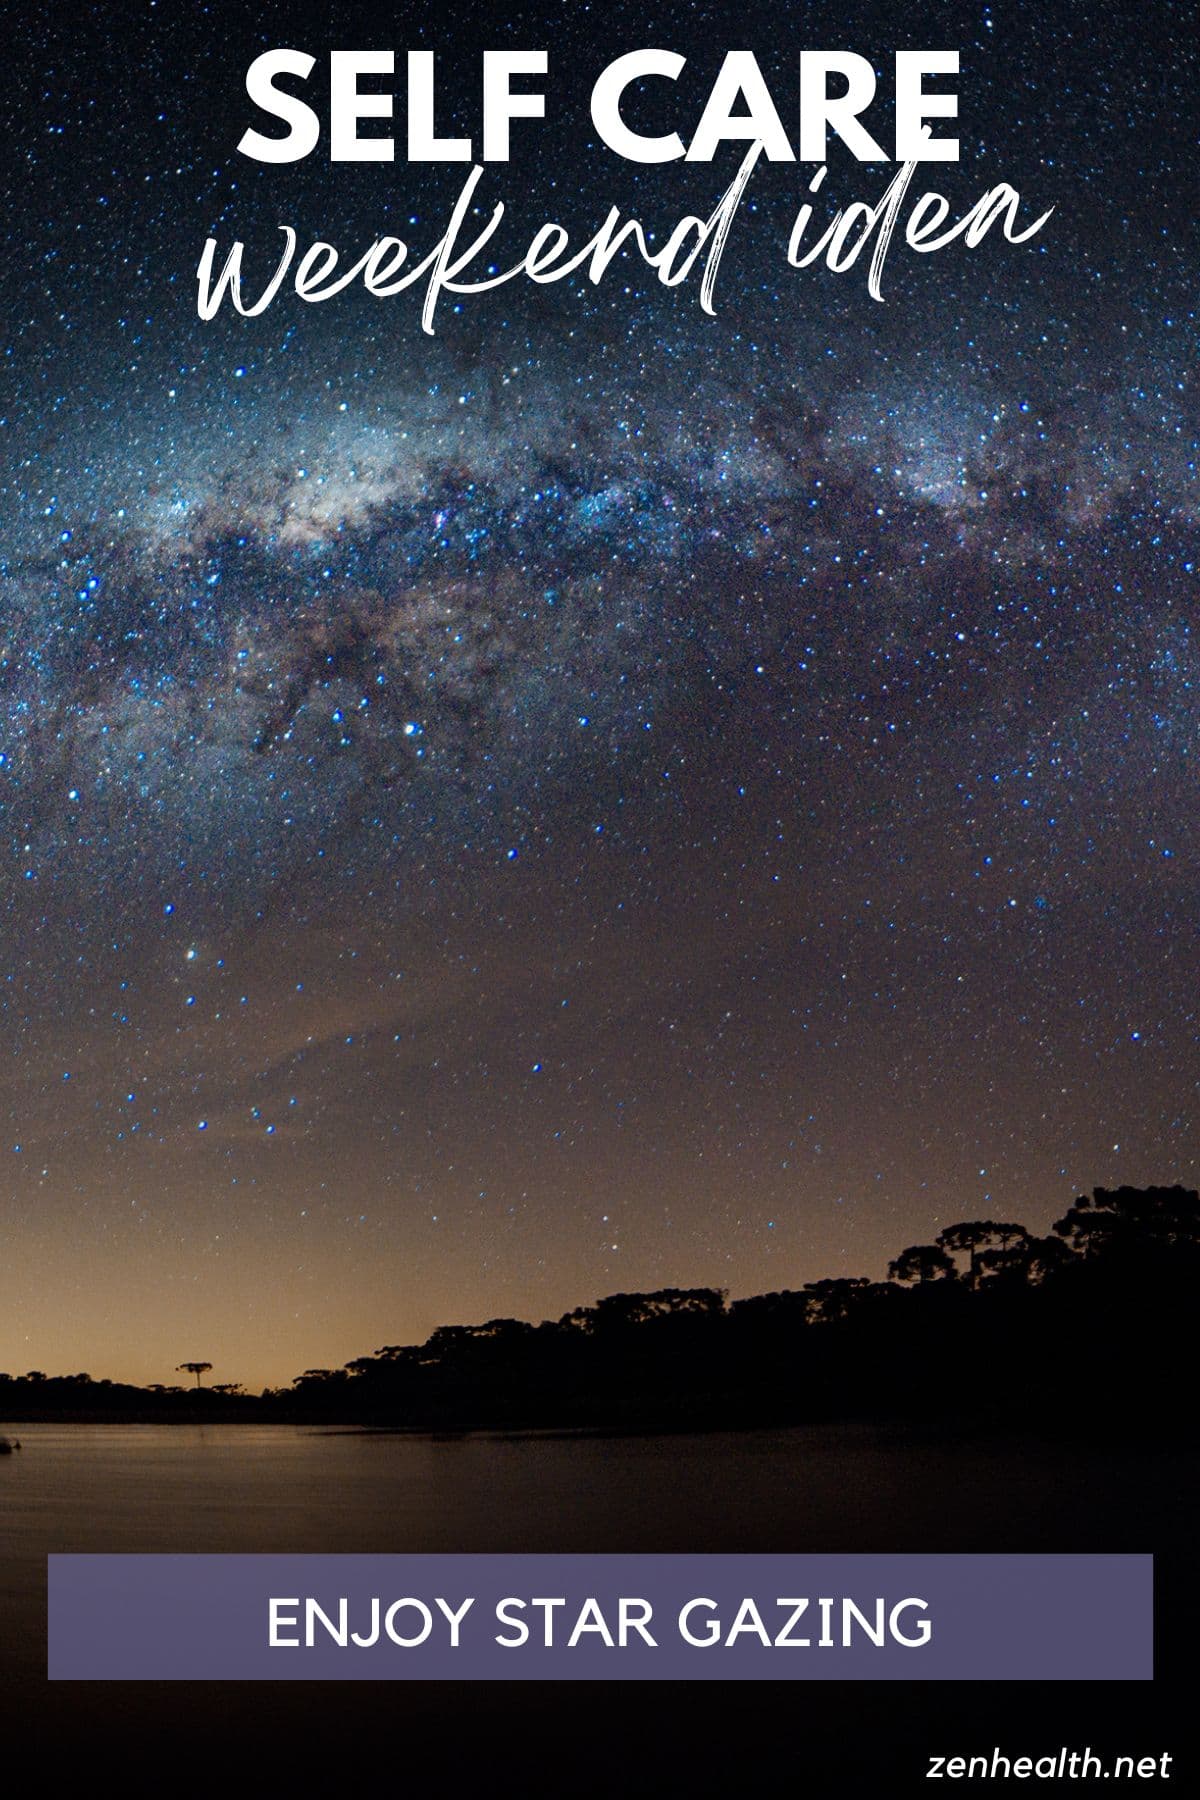 self care weekend idea: enjoy star gazing text overlay on a photo of a waterway with the stars